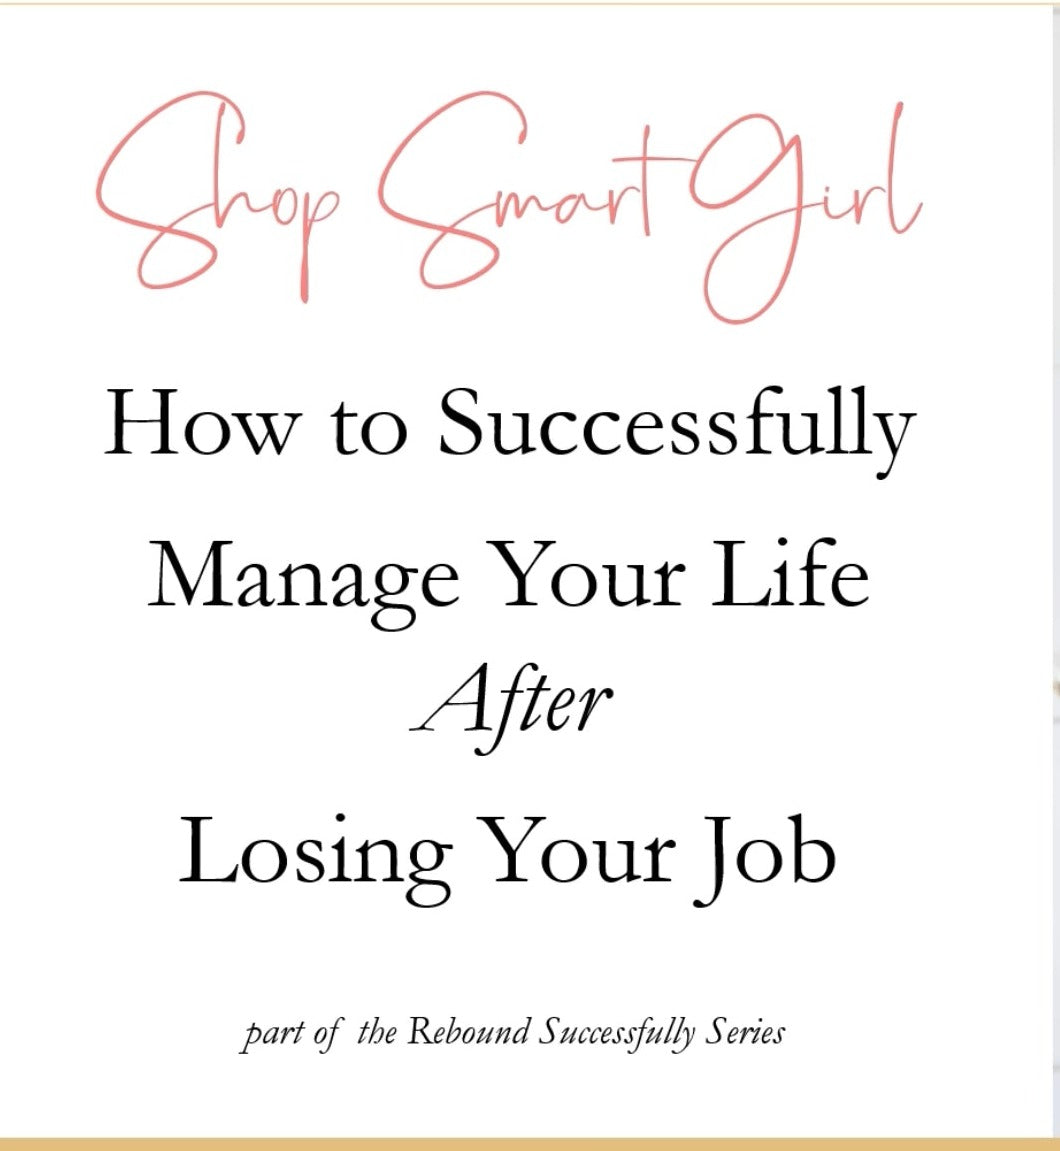 How to Successfully Manage Your Life After Losing Your Job